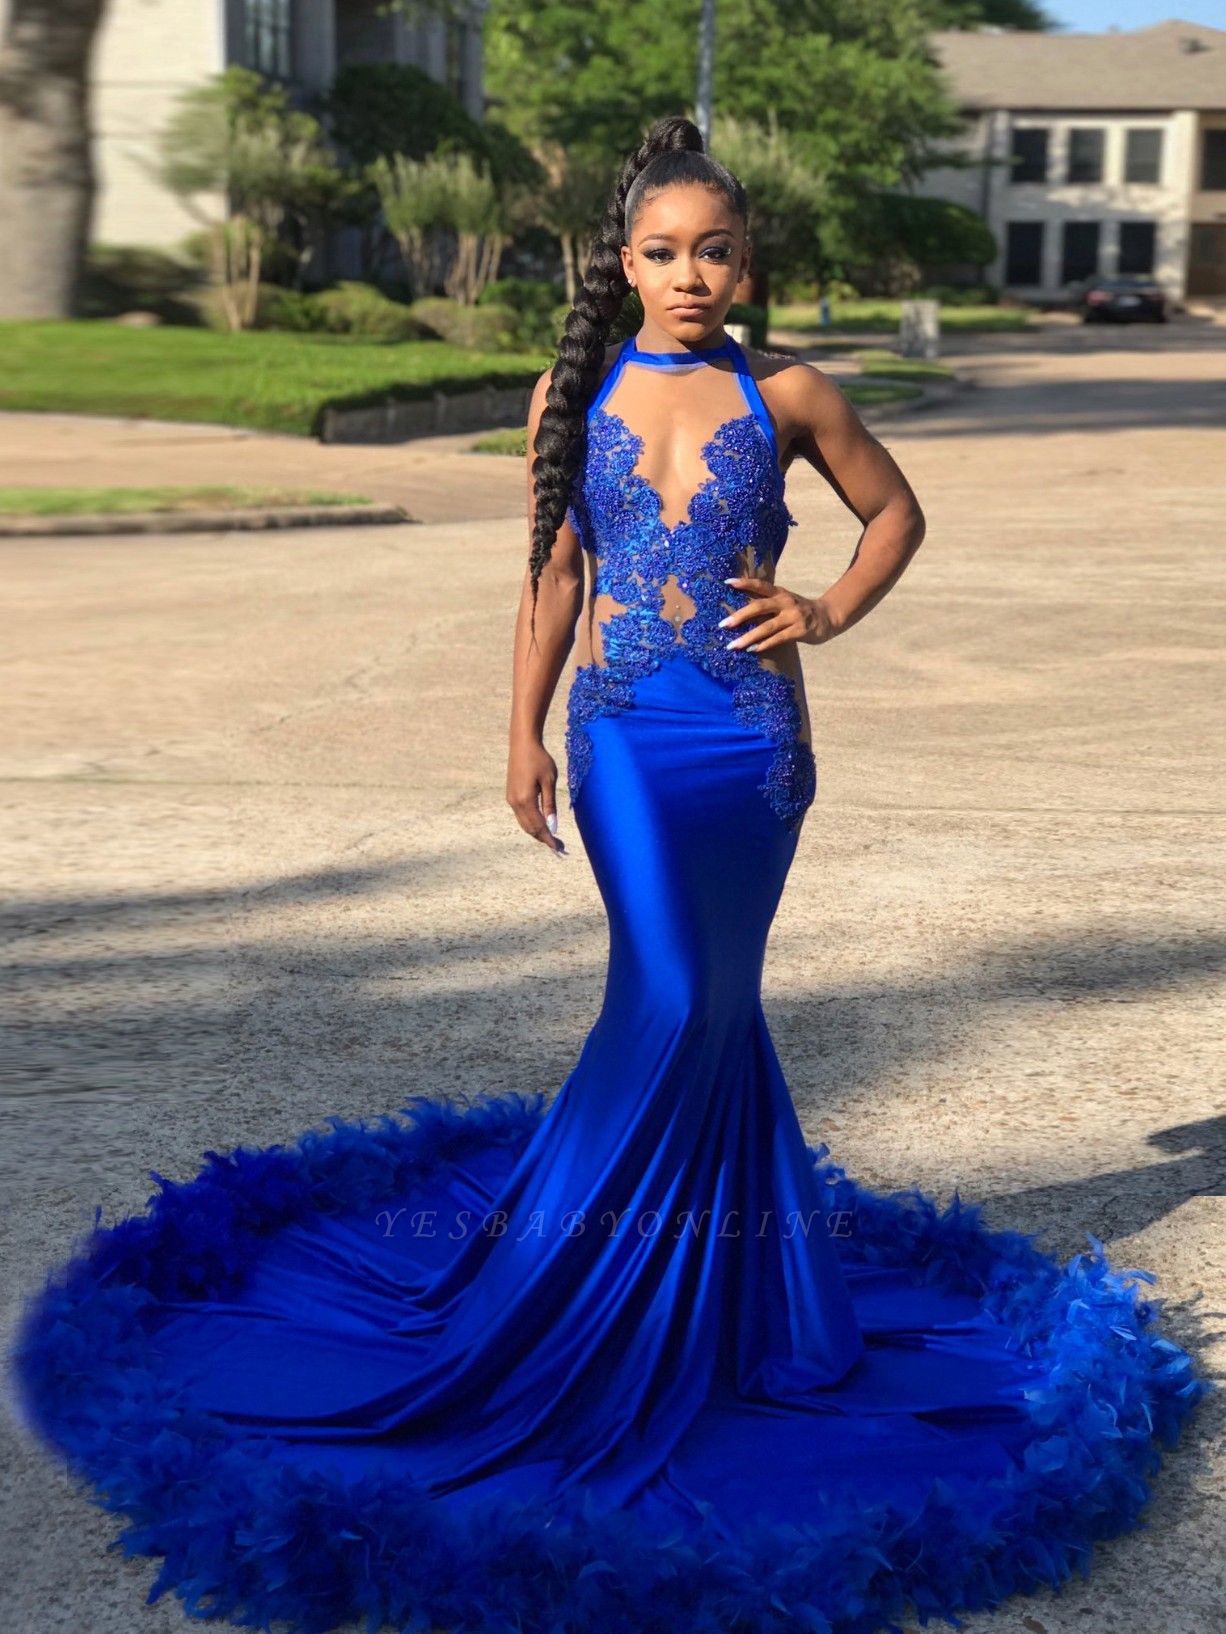 Luxury Royal Blue Prom Dresses | Sexy Feather Mermaid Evening Gowns